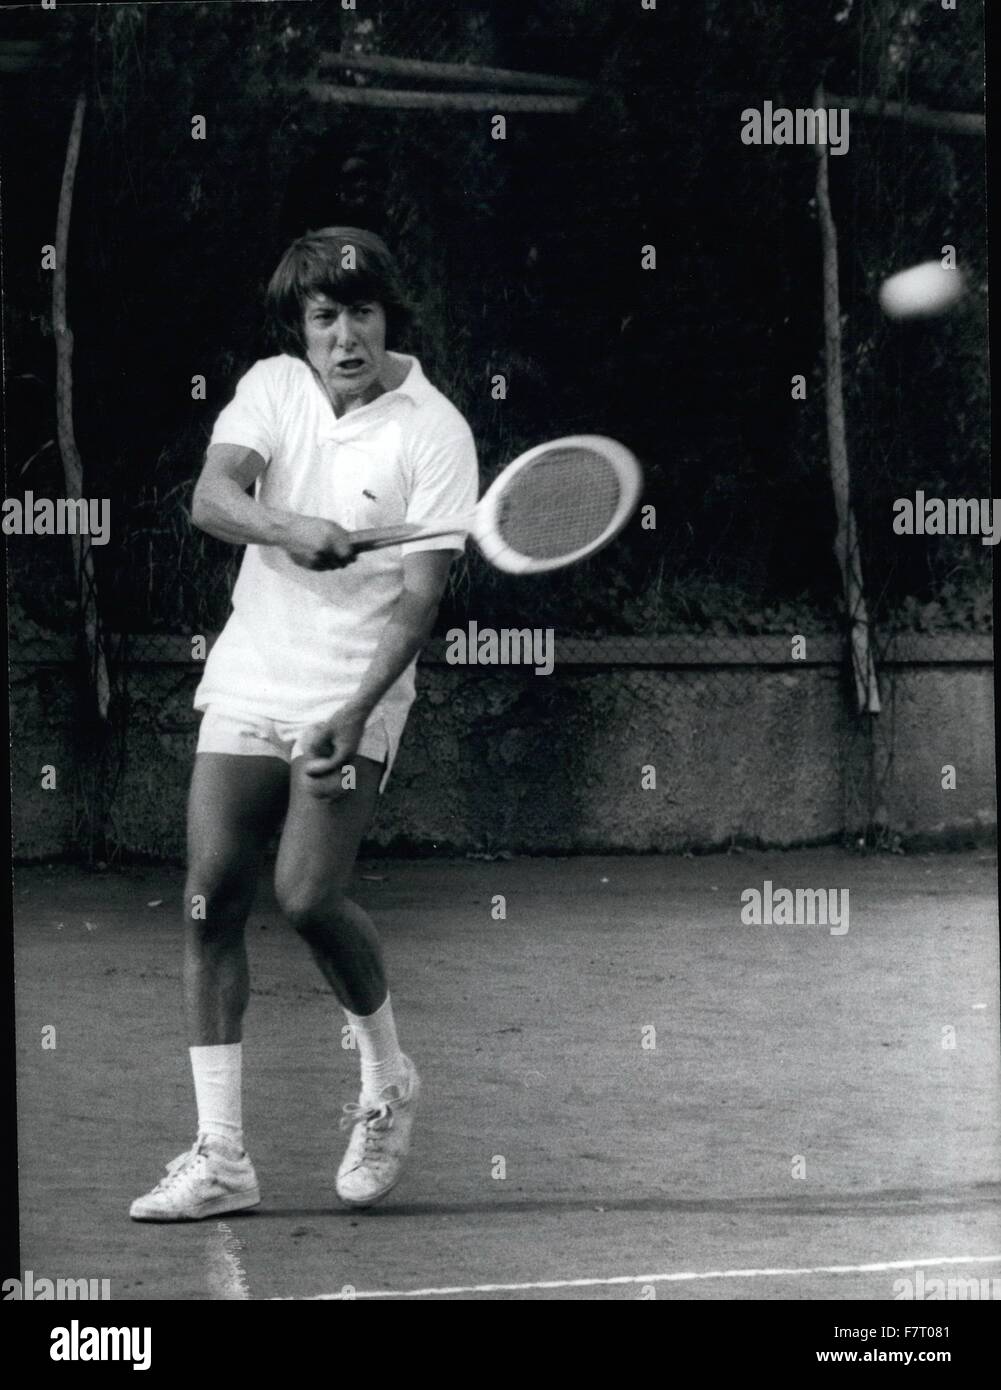 1971 - Roma Septembre 1971. Dustin Hofman plays tennis. Dustin Hofman the  famous actor, spends time these days in Rome waiting to play a film up to  date directed by director Peitro